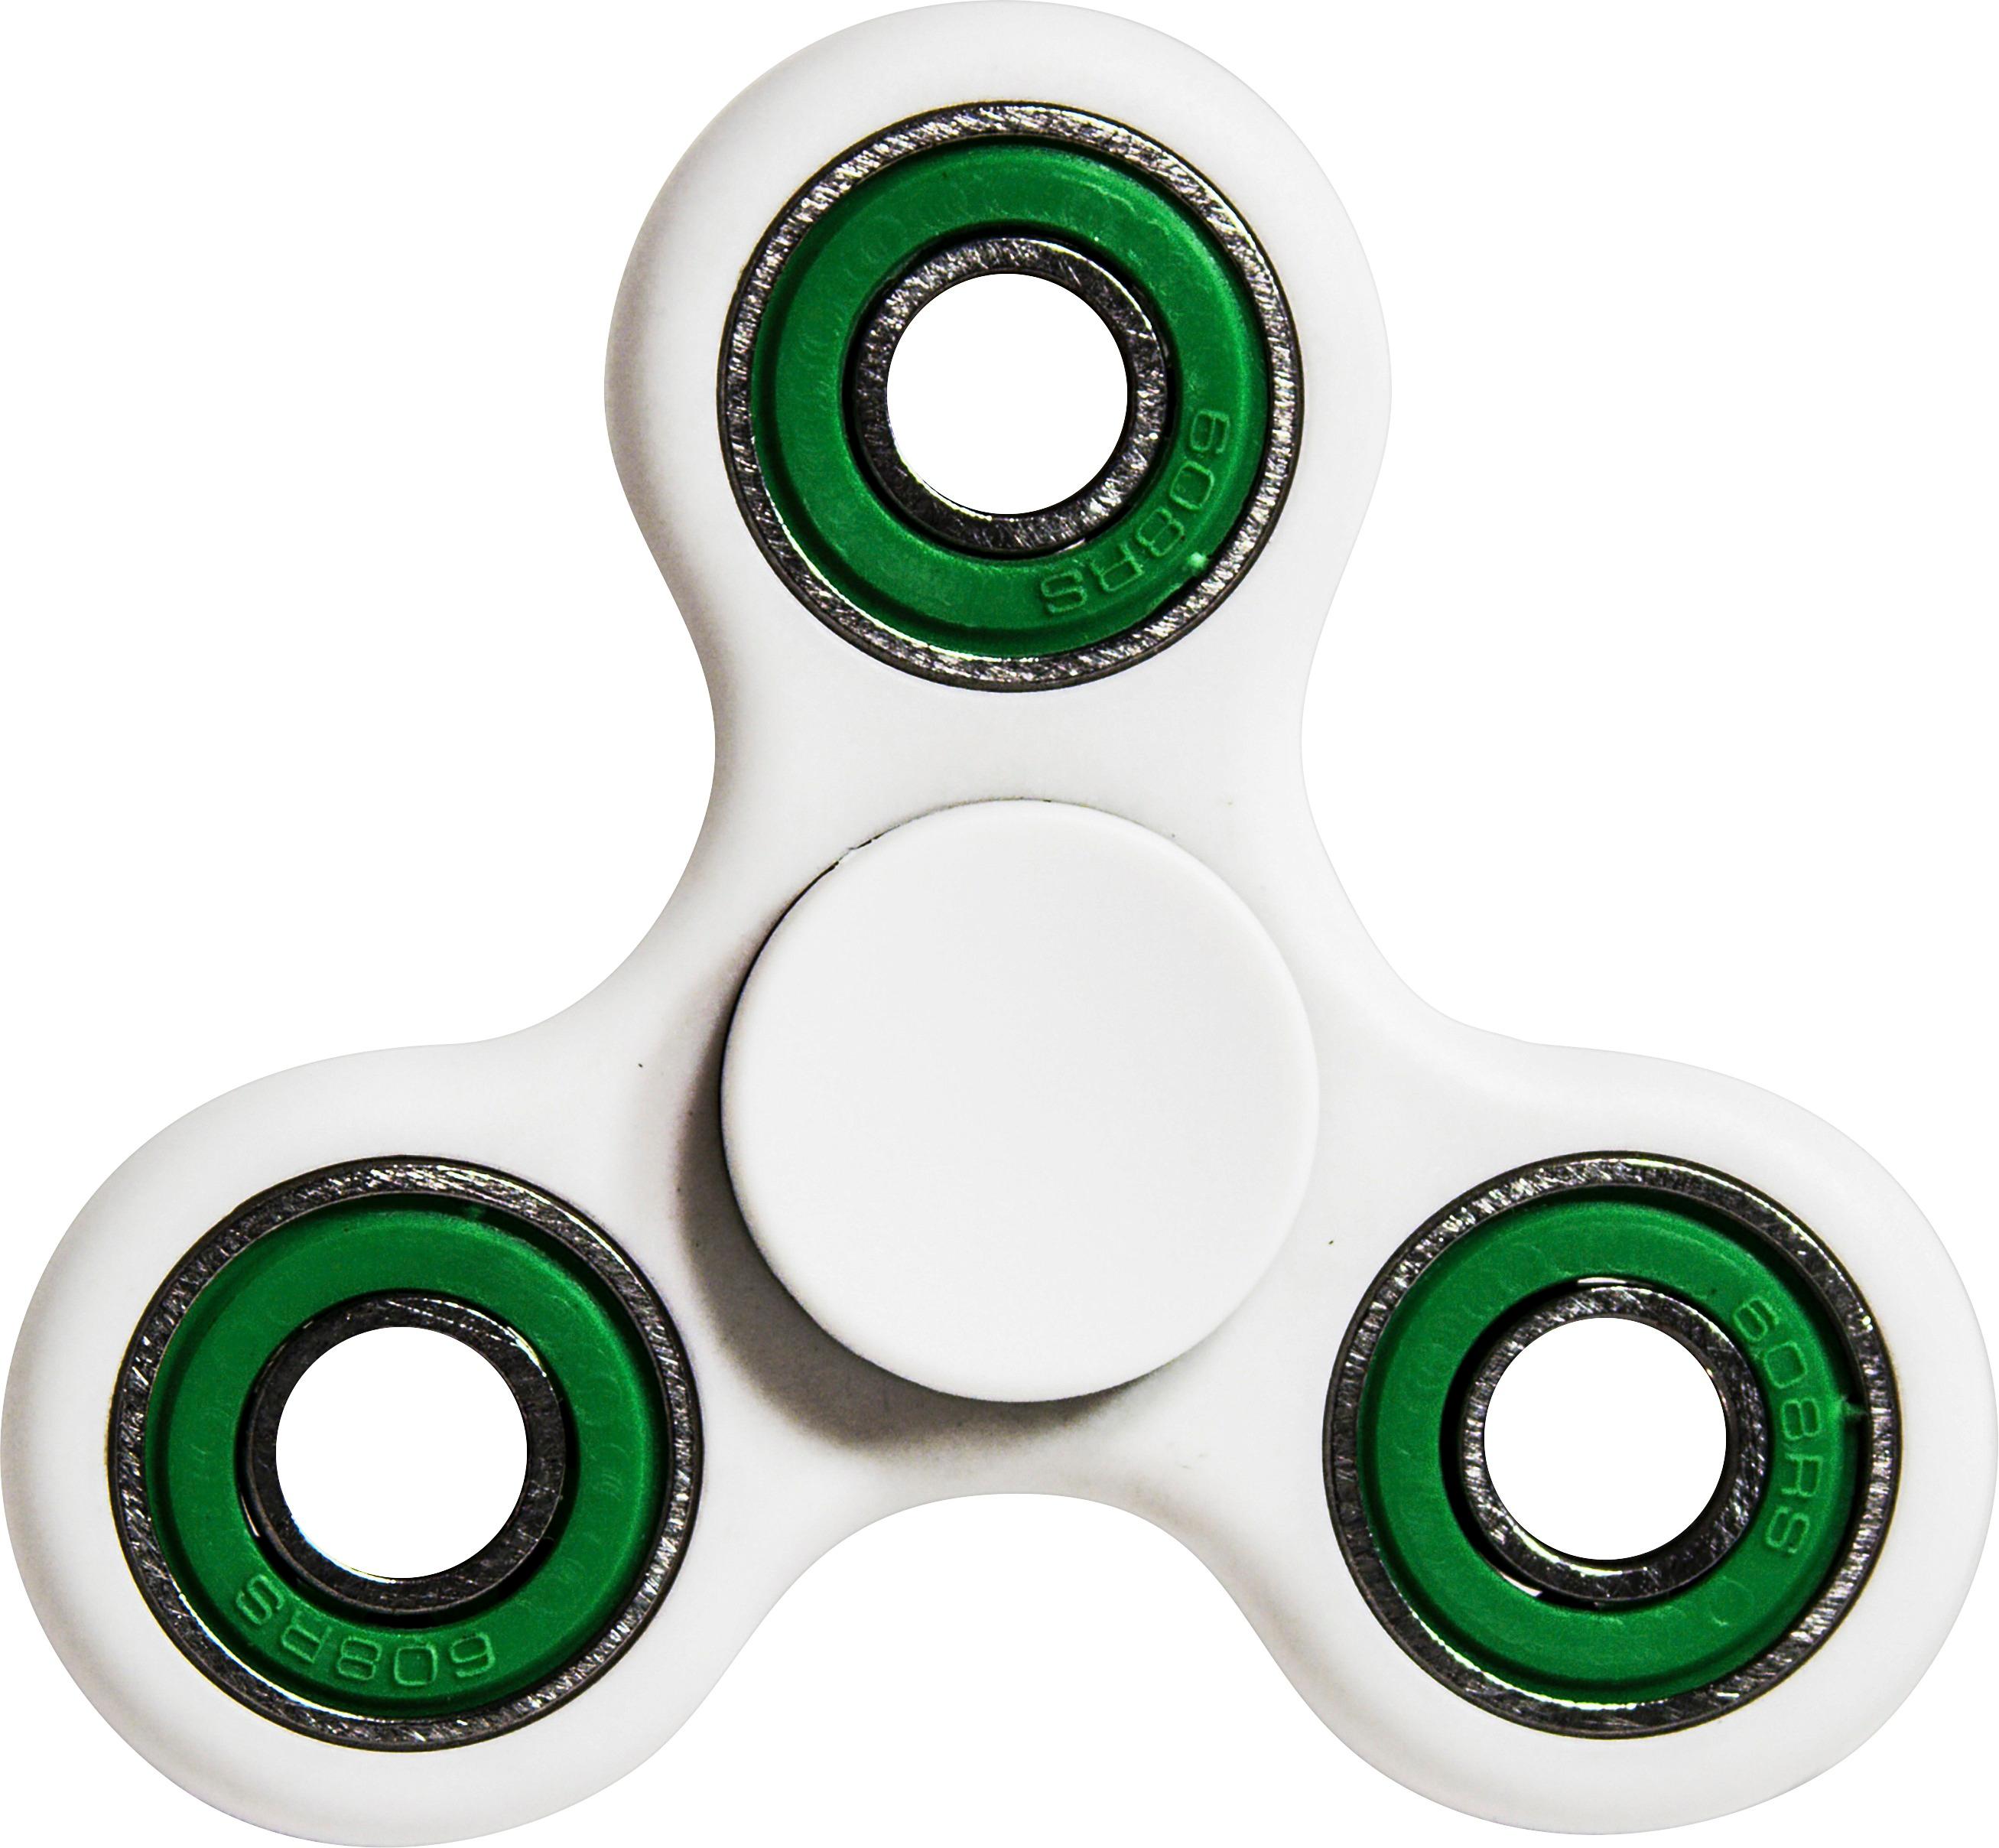 A Grade* Fidget Spinner Stress Reduction Toy - Green, Toys